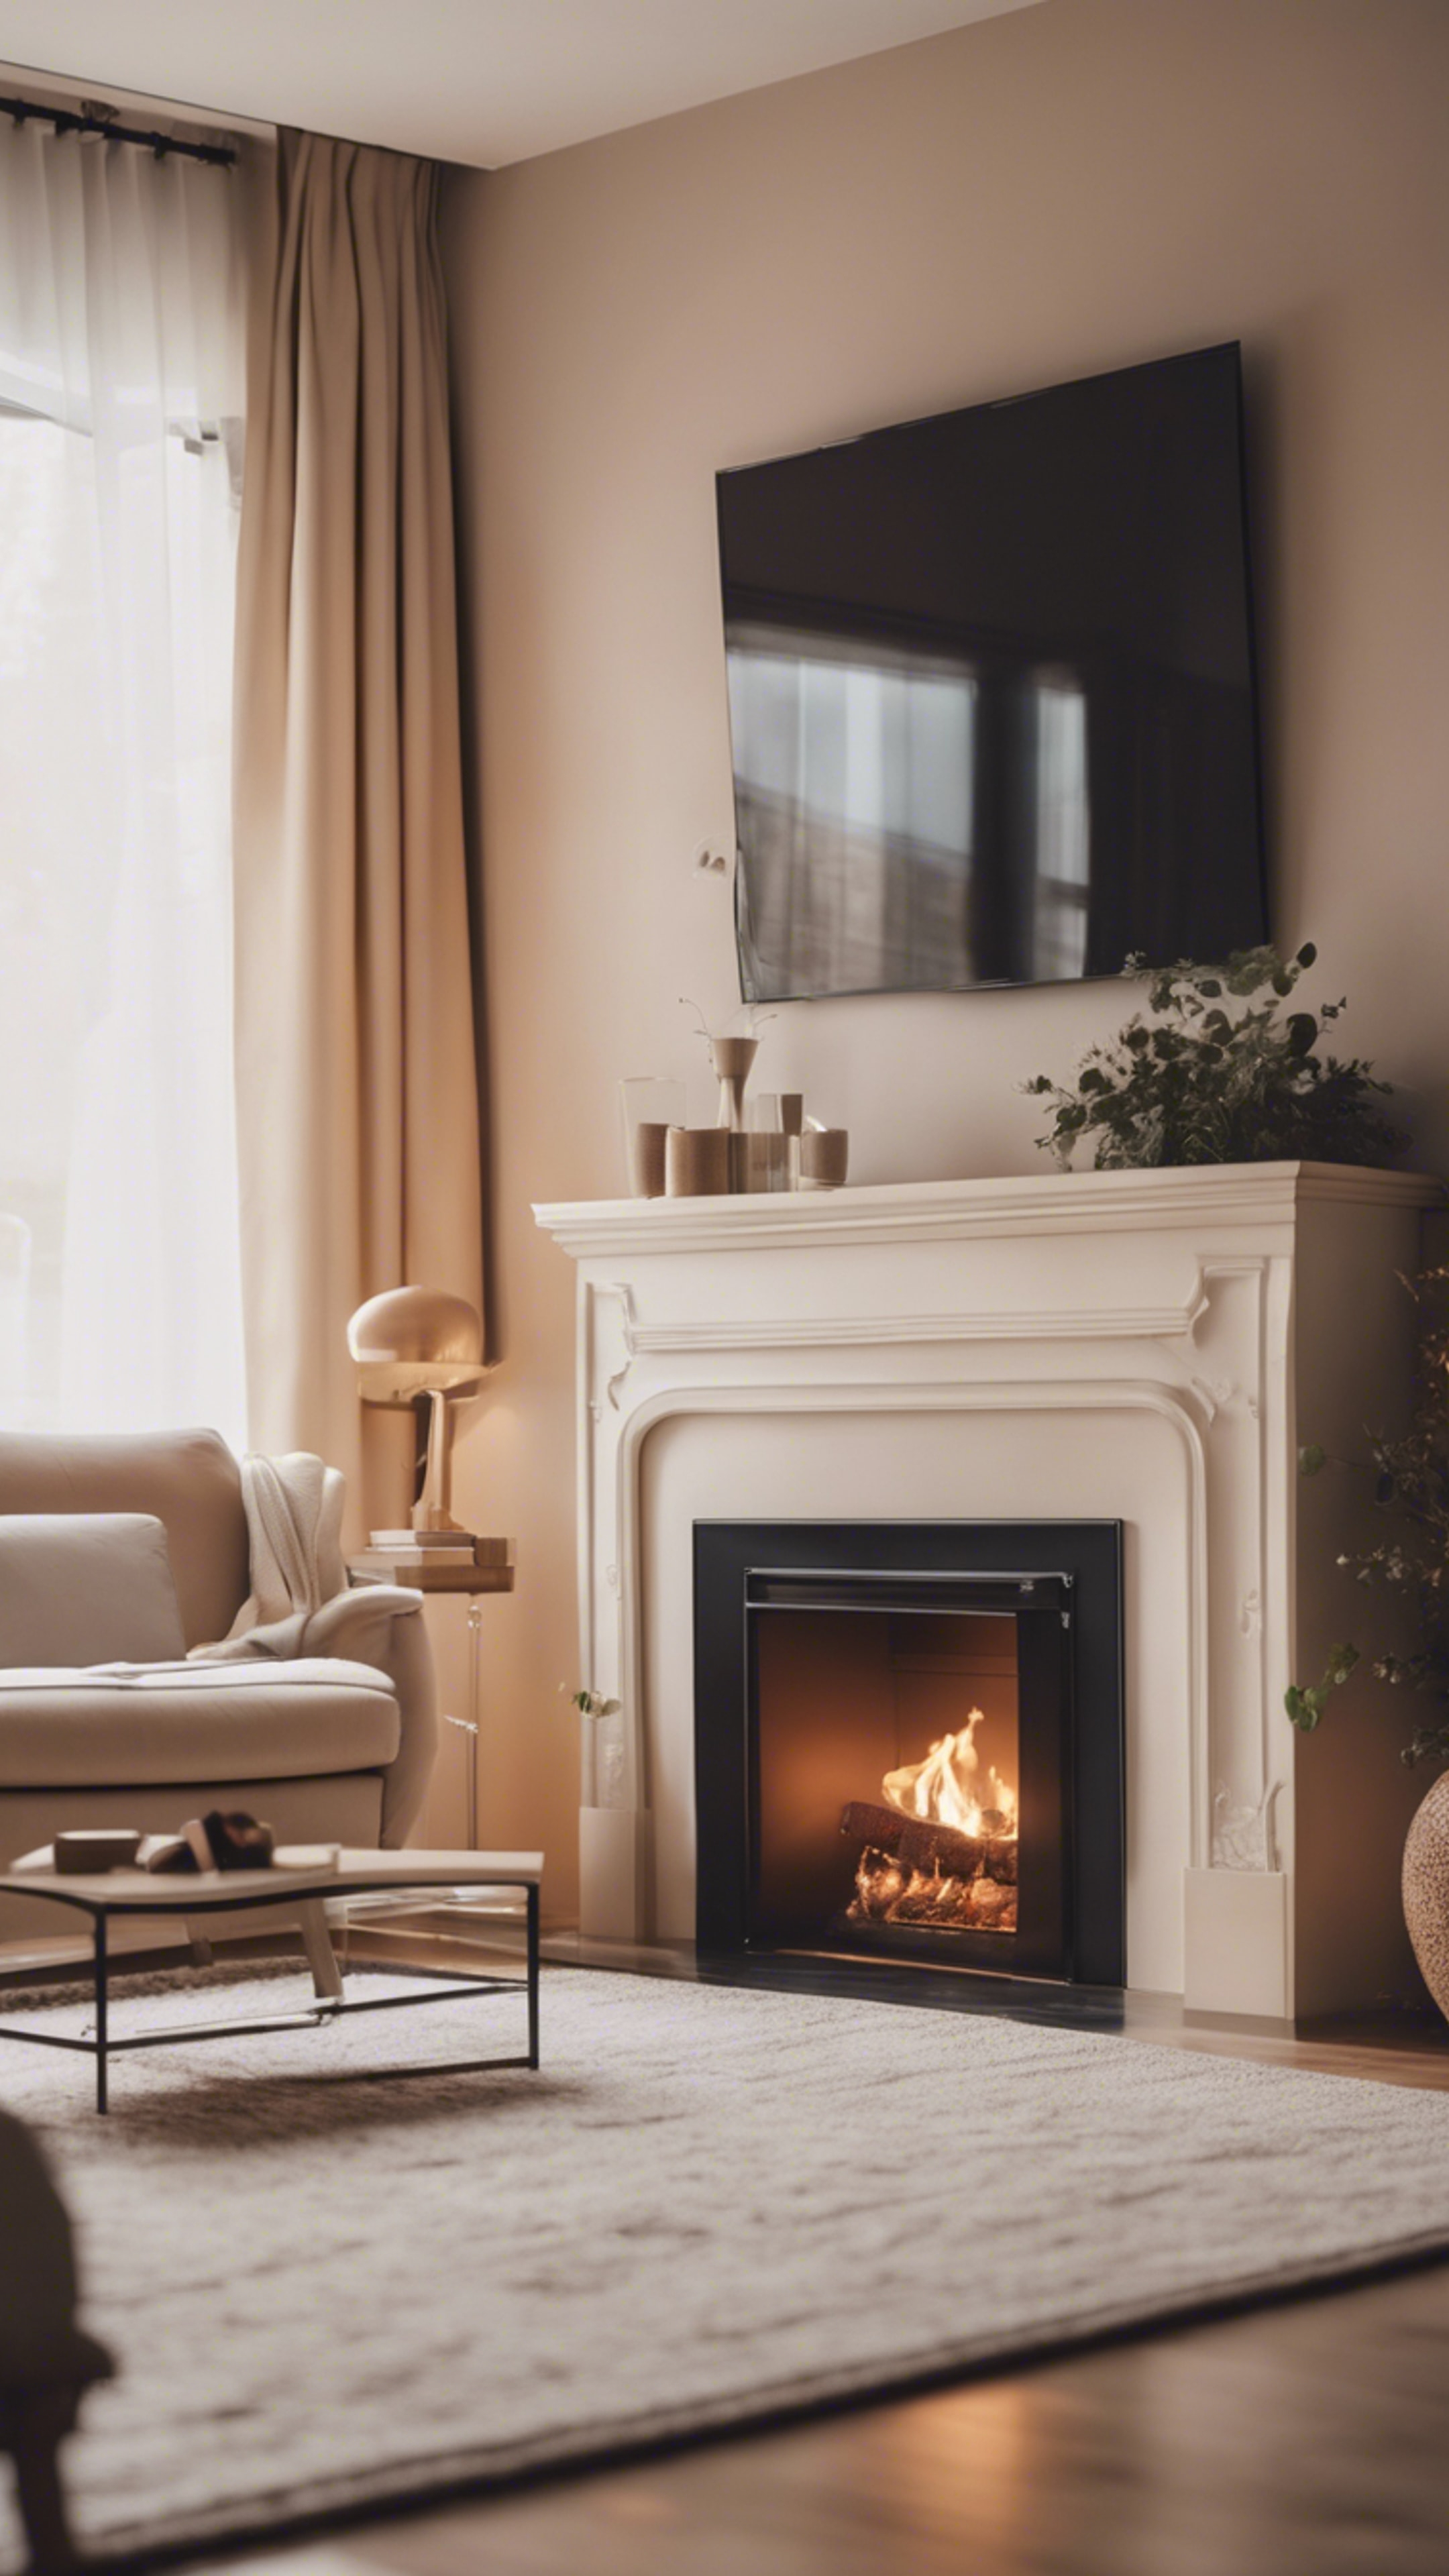 A cozy and tranquil cool beige living room with a fireplace alive with dancing flames. 벽지[fdd7e3460c134e479b57]